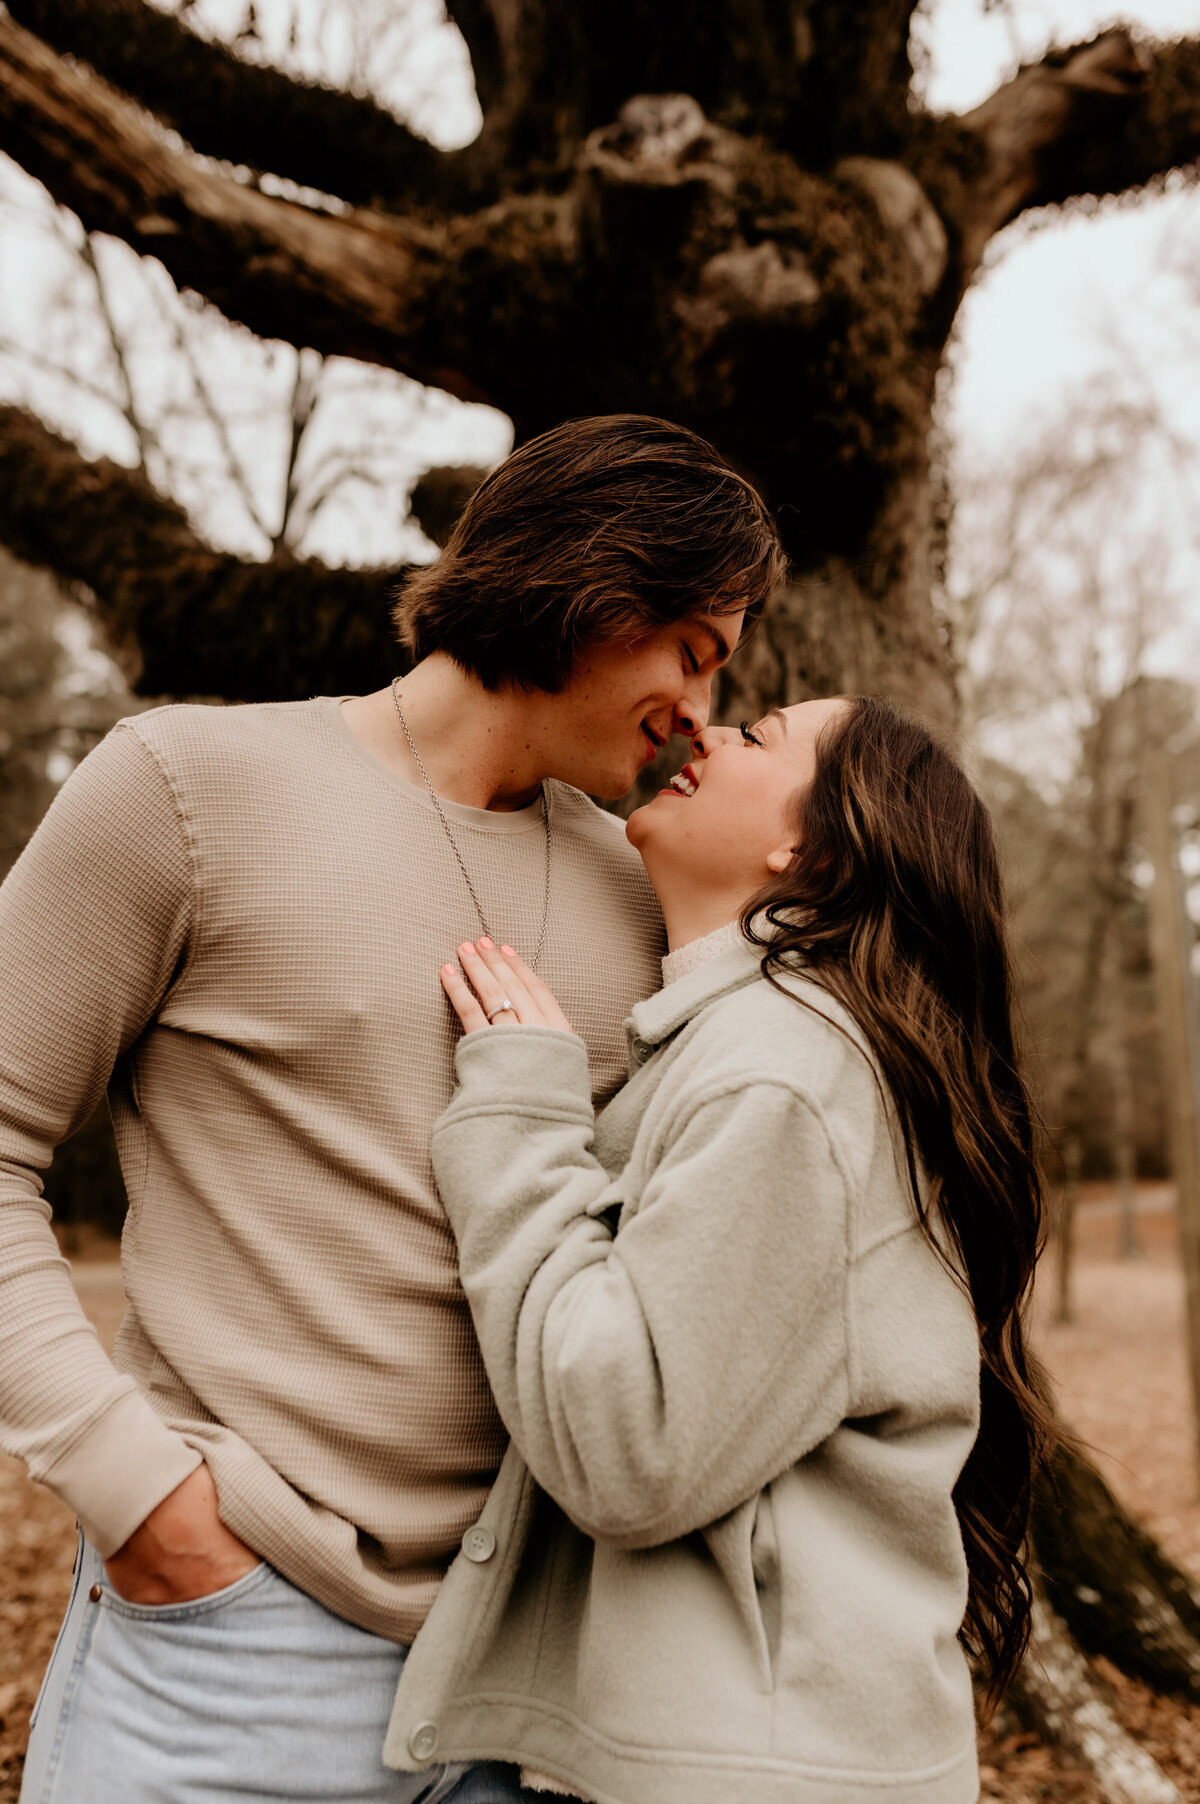 man leaning down to kiss his fiance as she laughs and smiles with a tree behind them